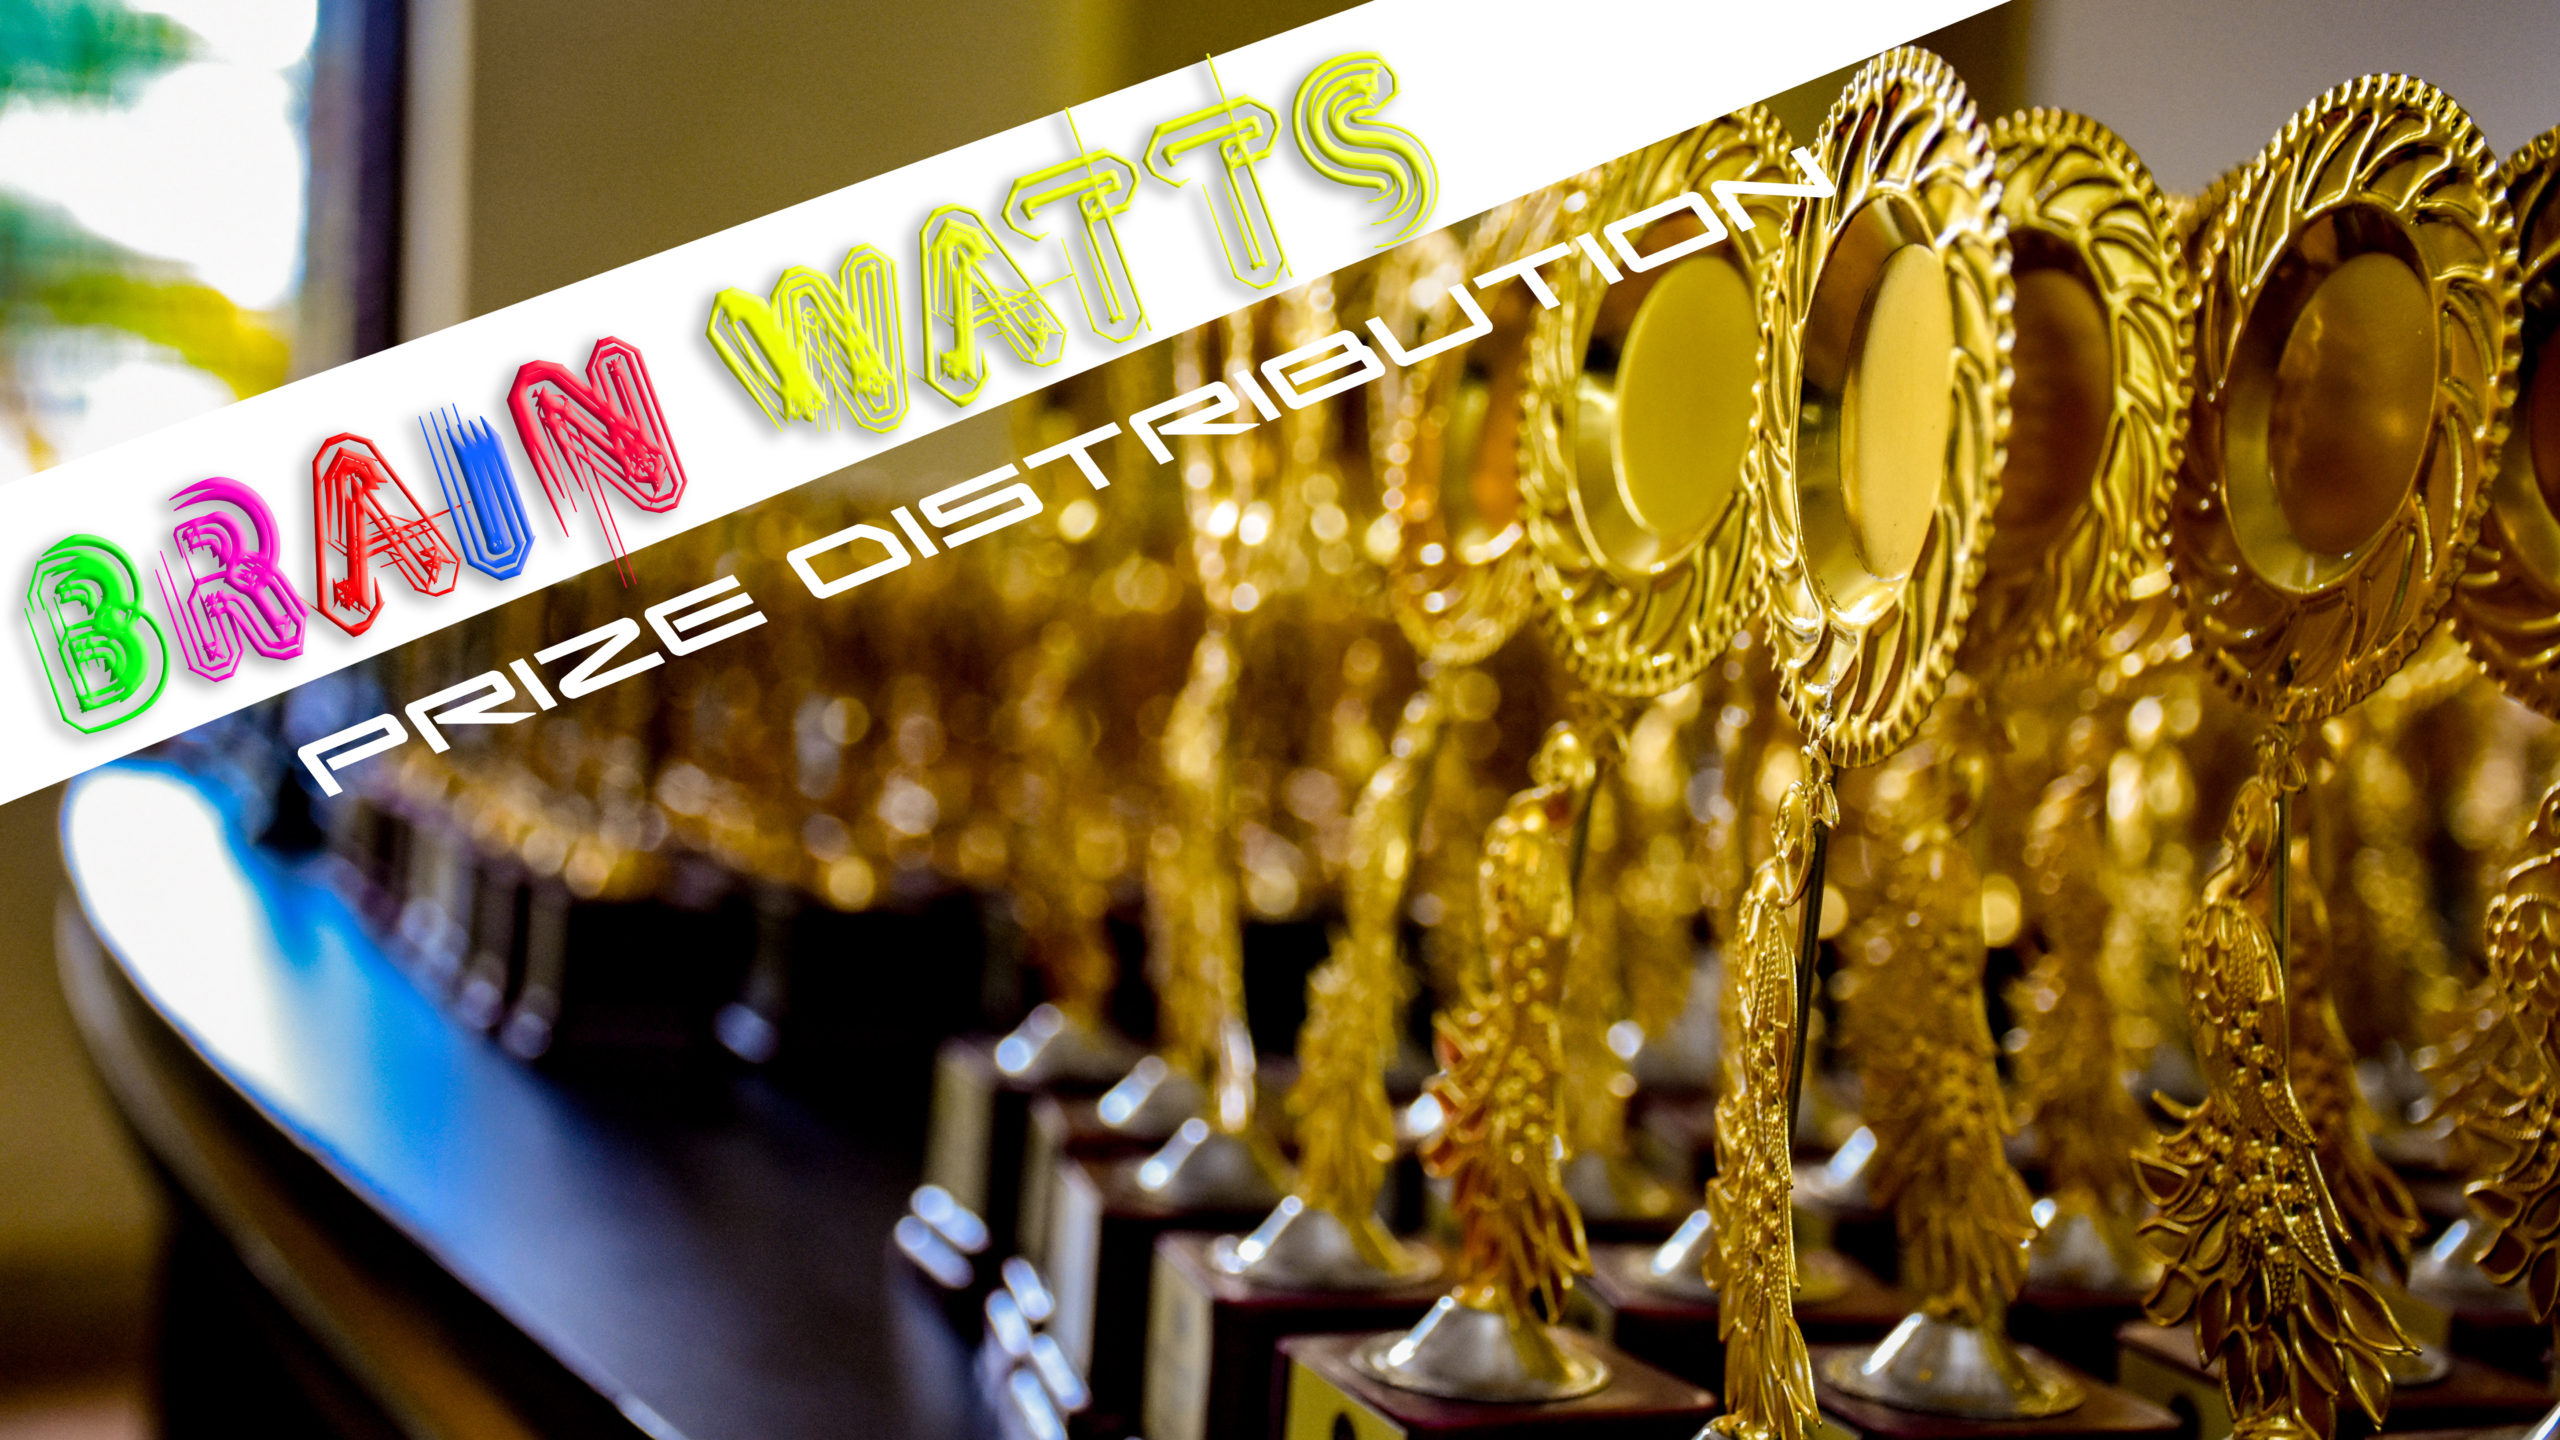 BRAIN WATTS 2020 COMPETITION PRIZE DISTRIBUTION.